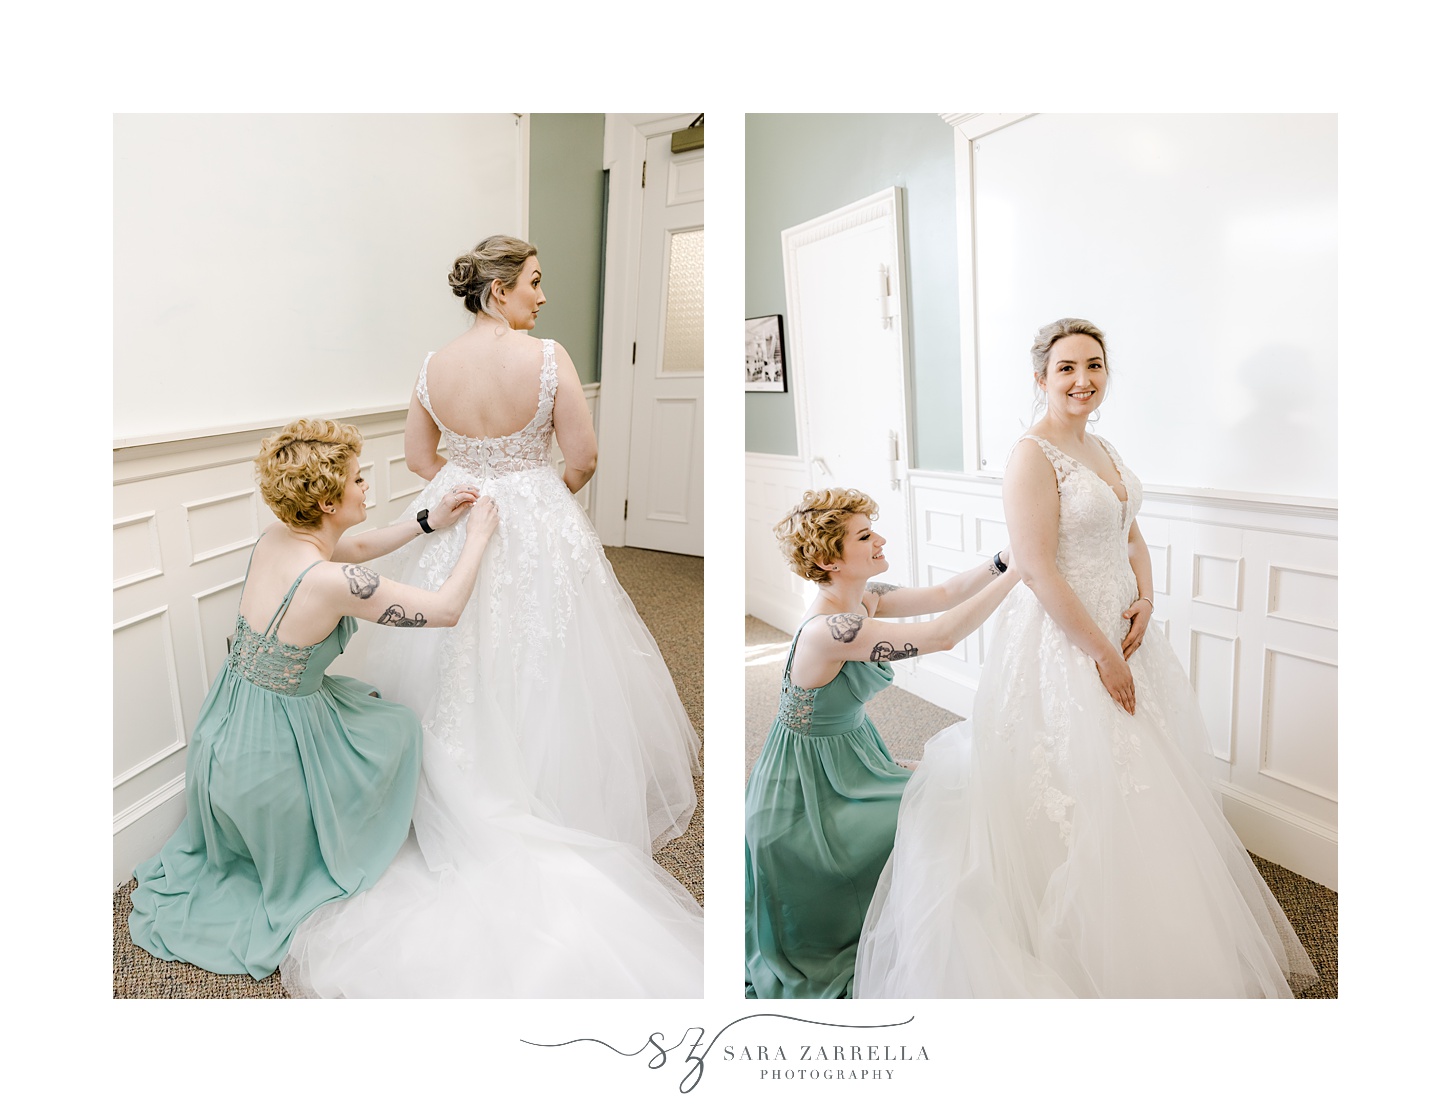 bridesmaid in green dress helps bride into gown